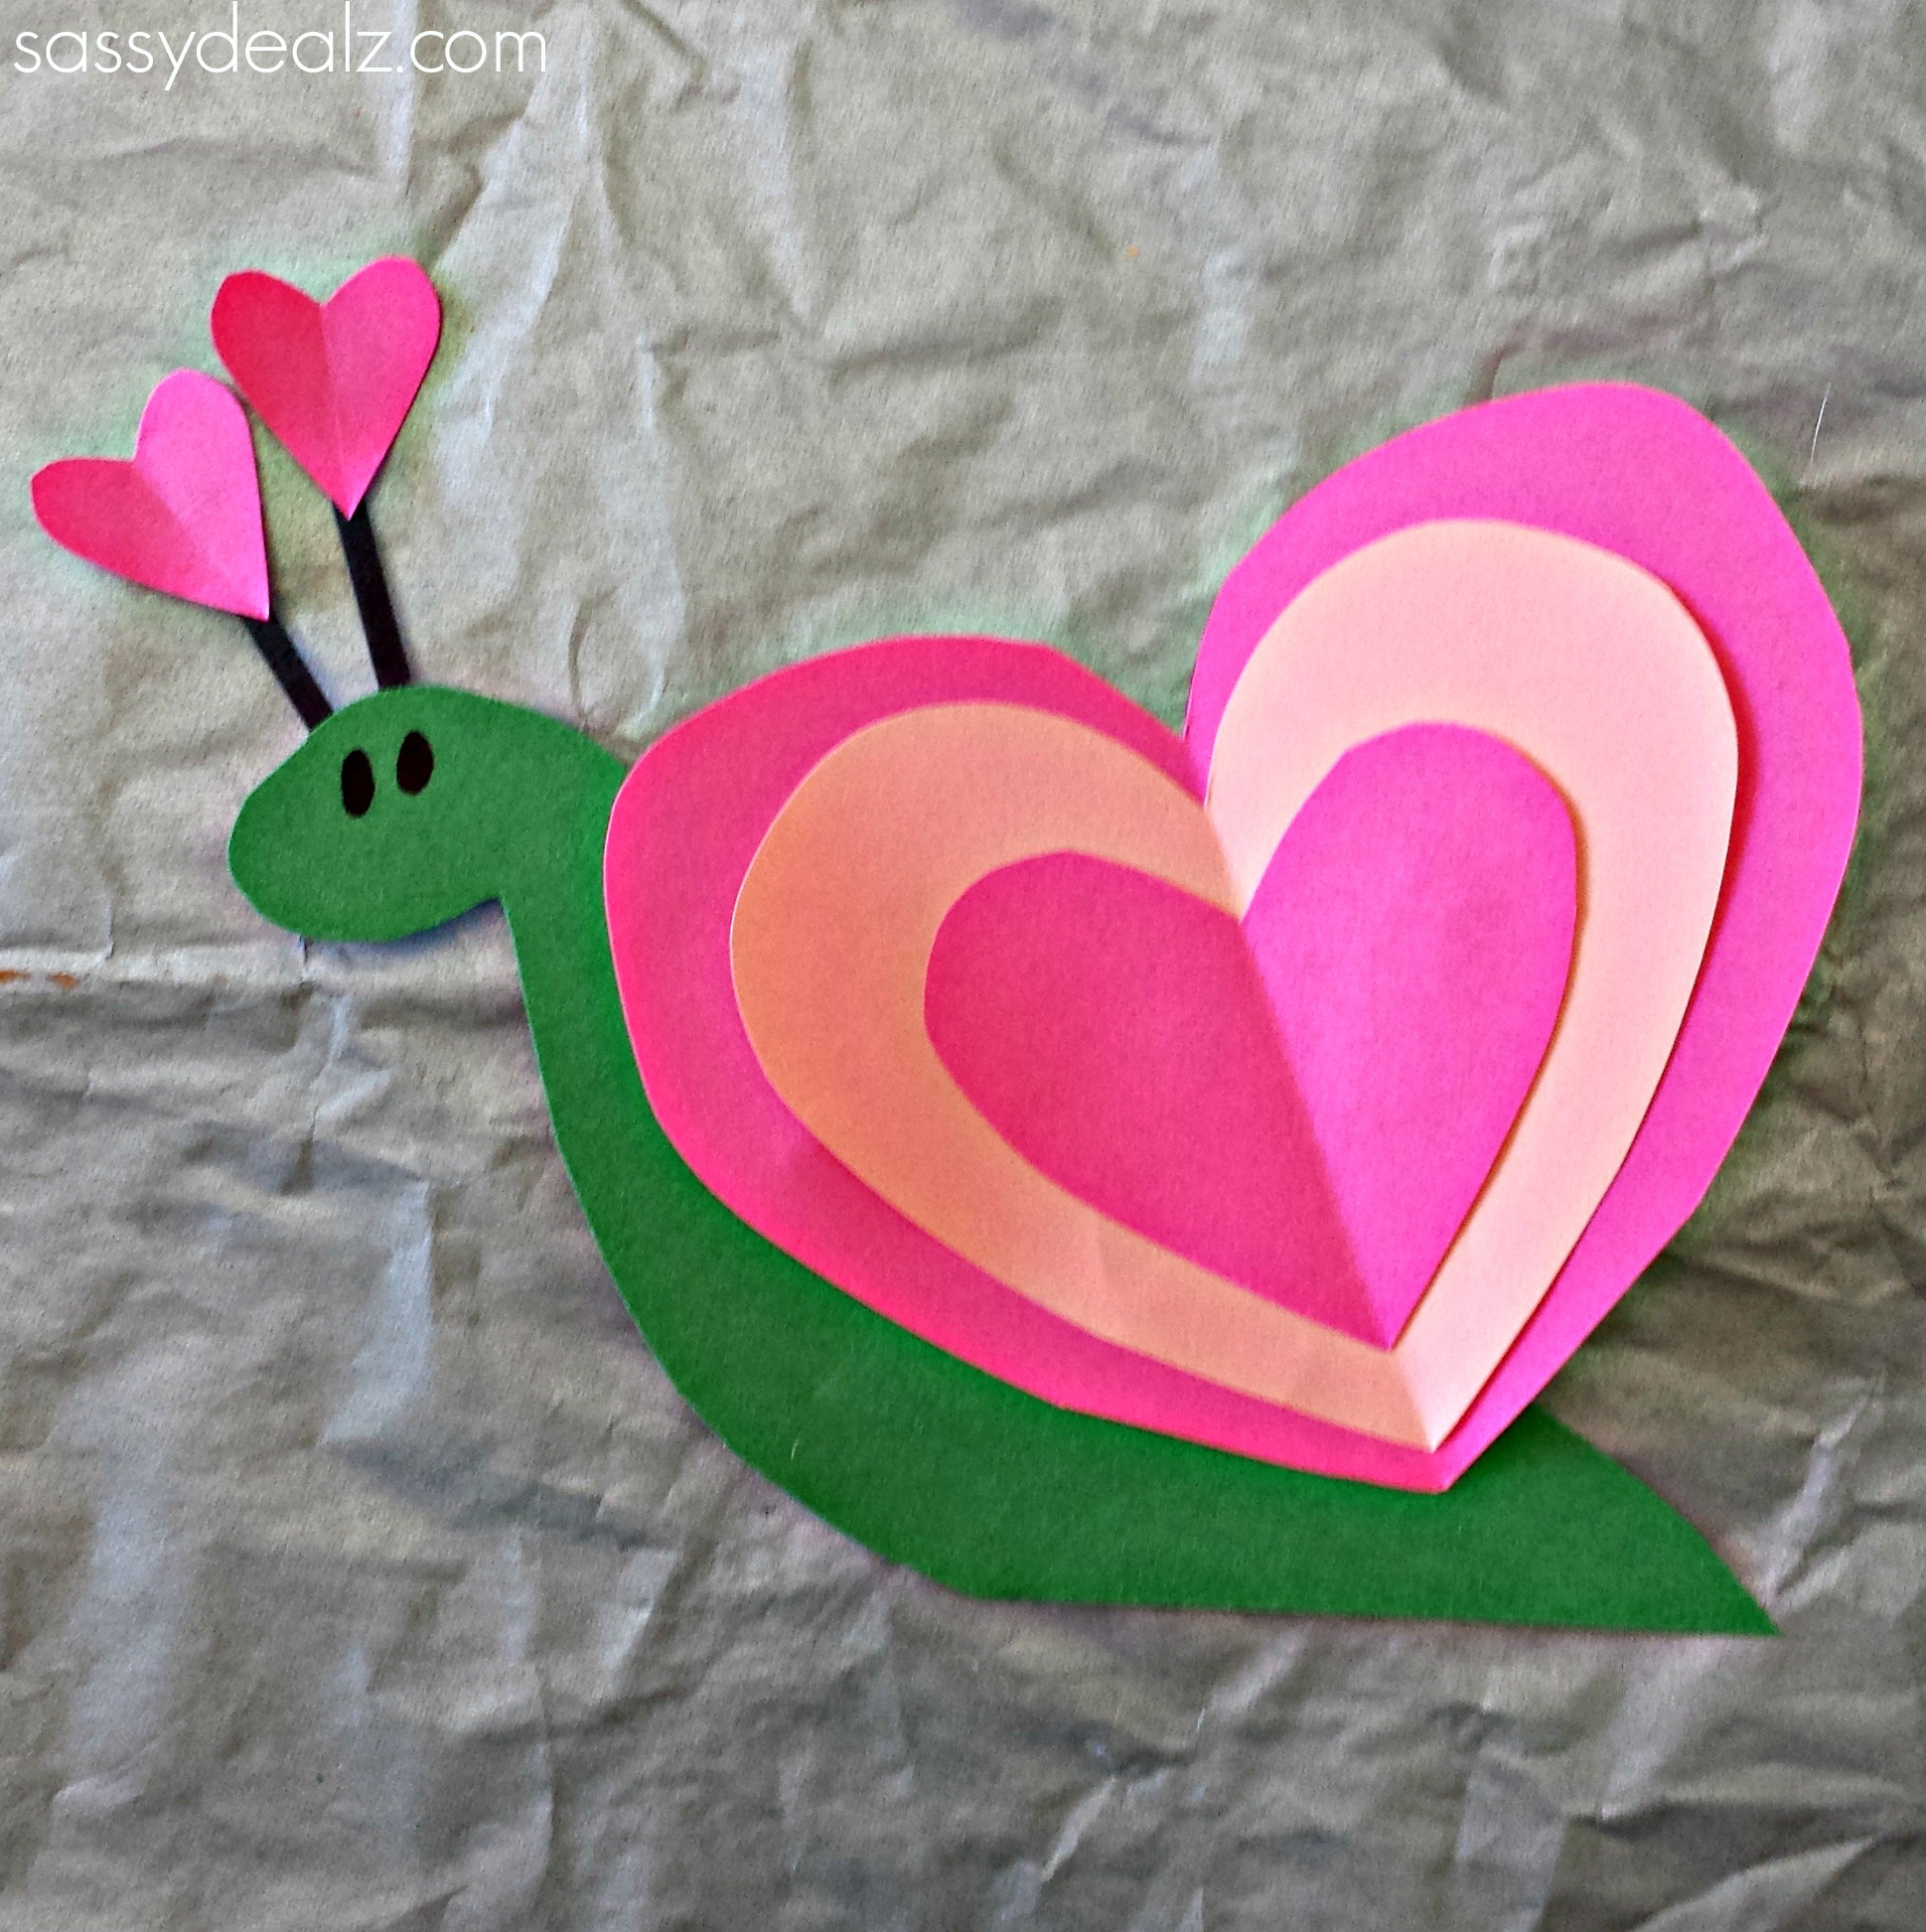 Heart Craft Ideas For Preschoolers
 List of Easy Valentine s Day Crafts for Kids Crafty Morning